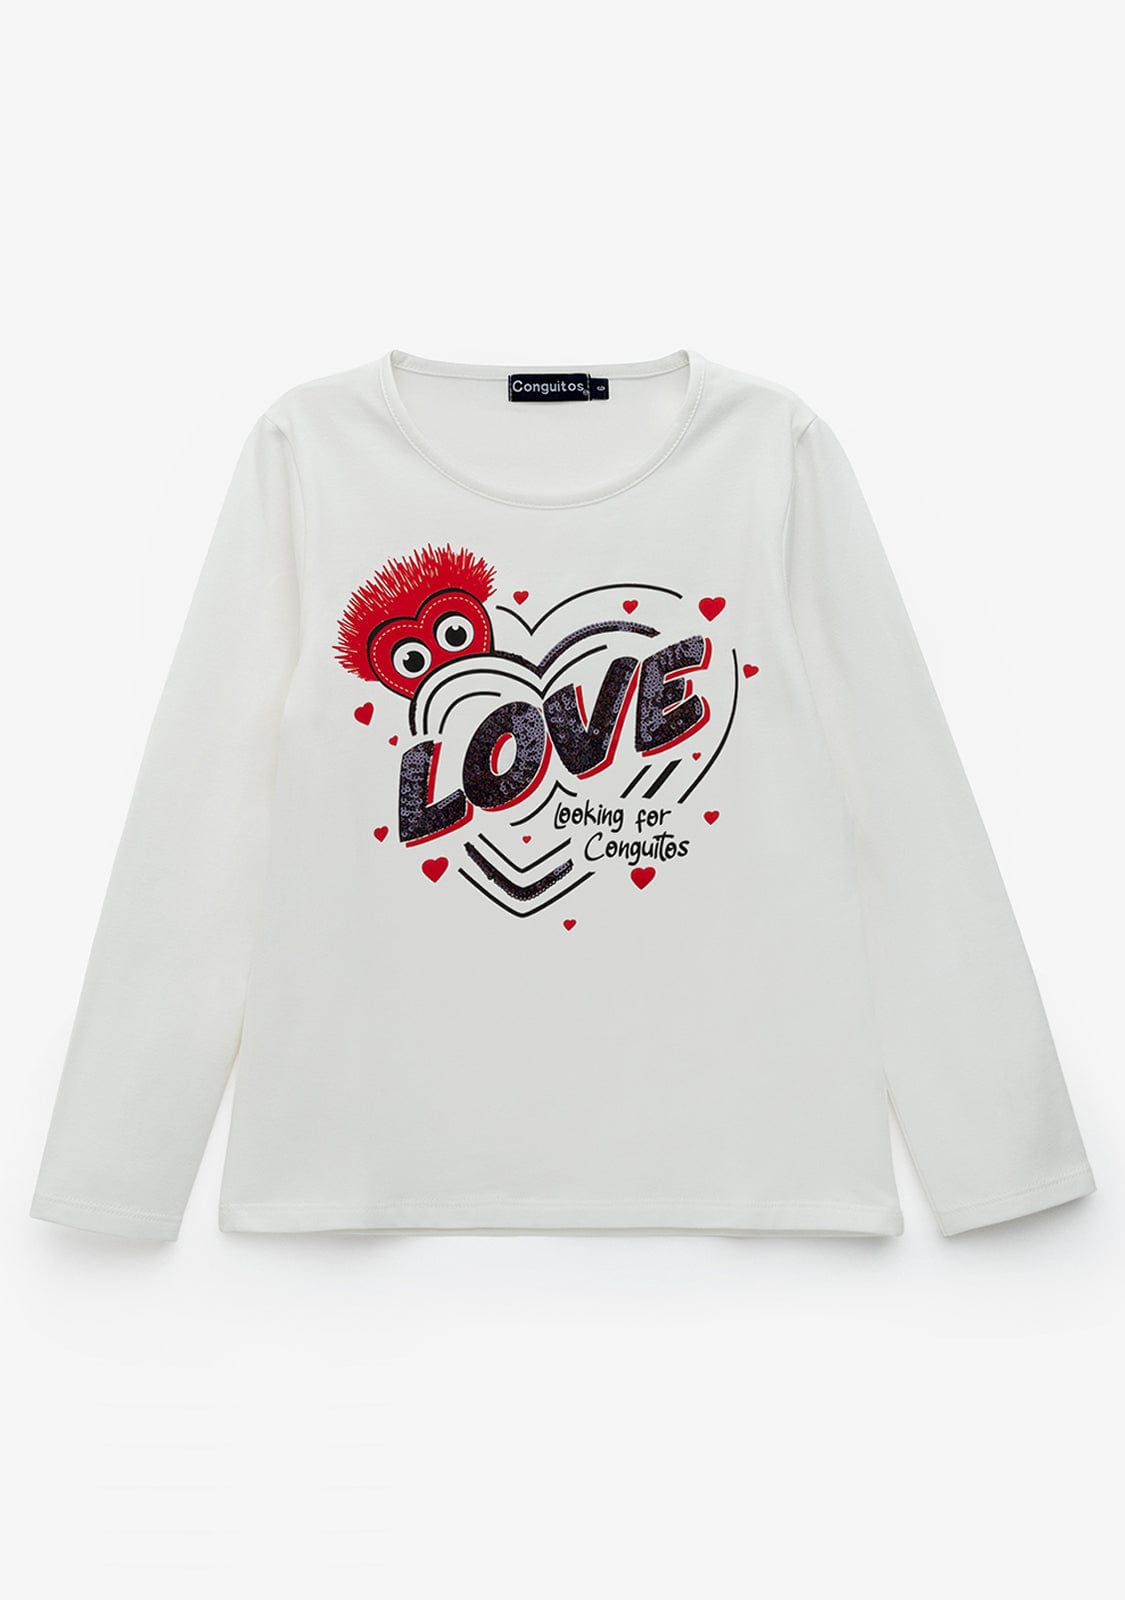 CONGUITOS TEXTIL Clothing Girl's White Heart of Love T-Shirt